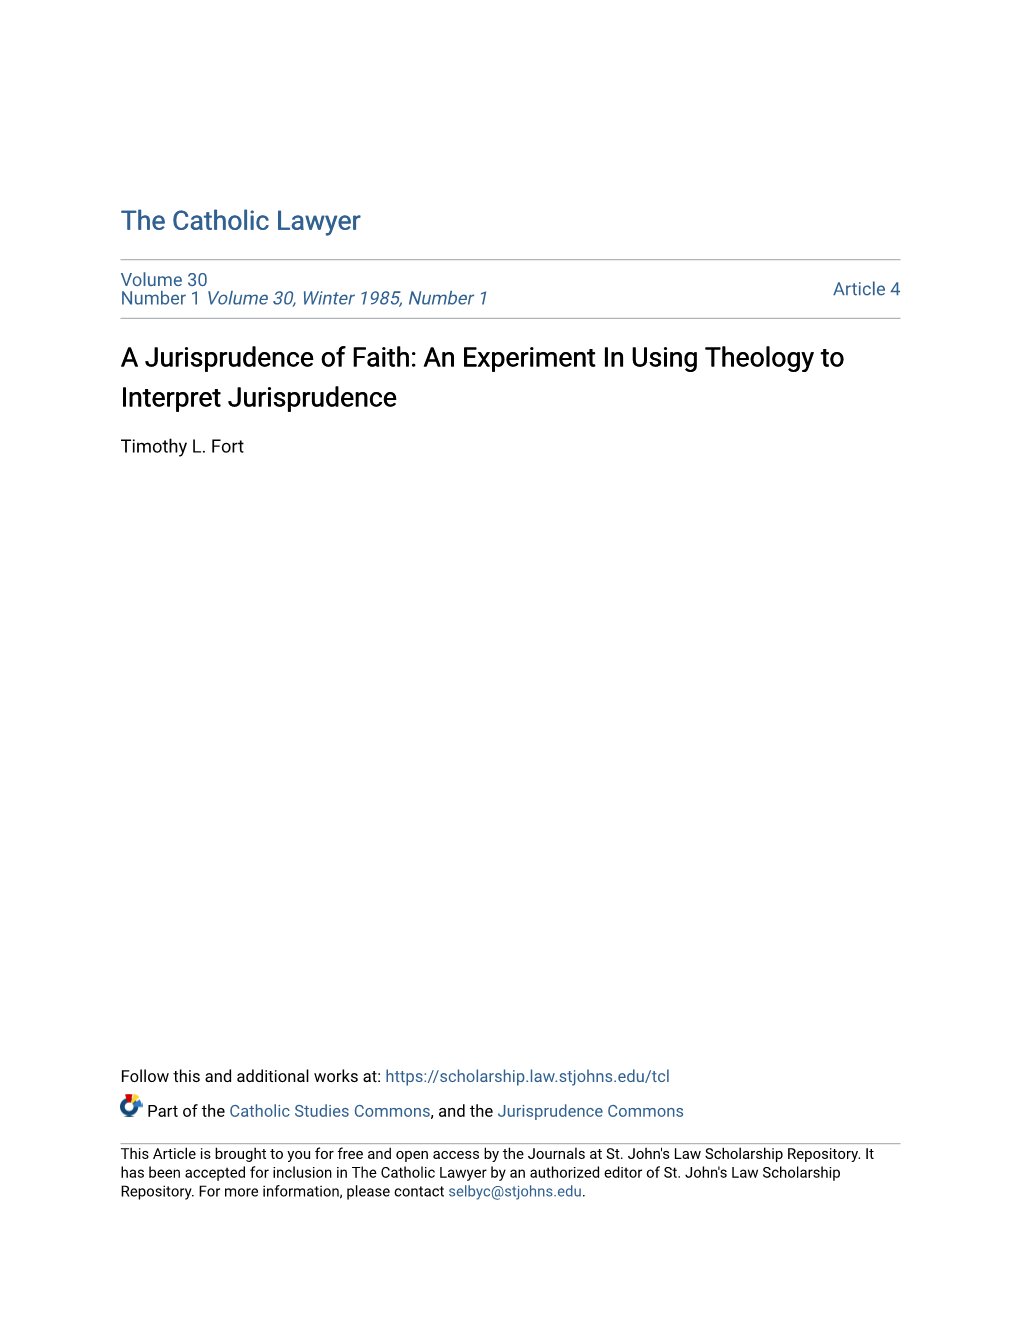 An Experiment in Using Theology to Interpret Jurisprudence